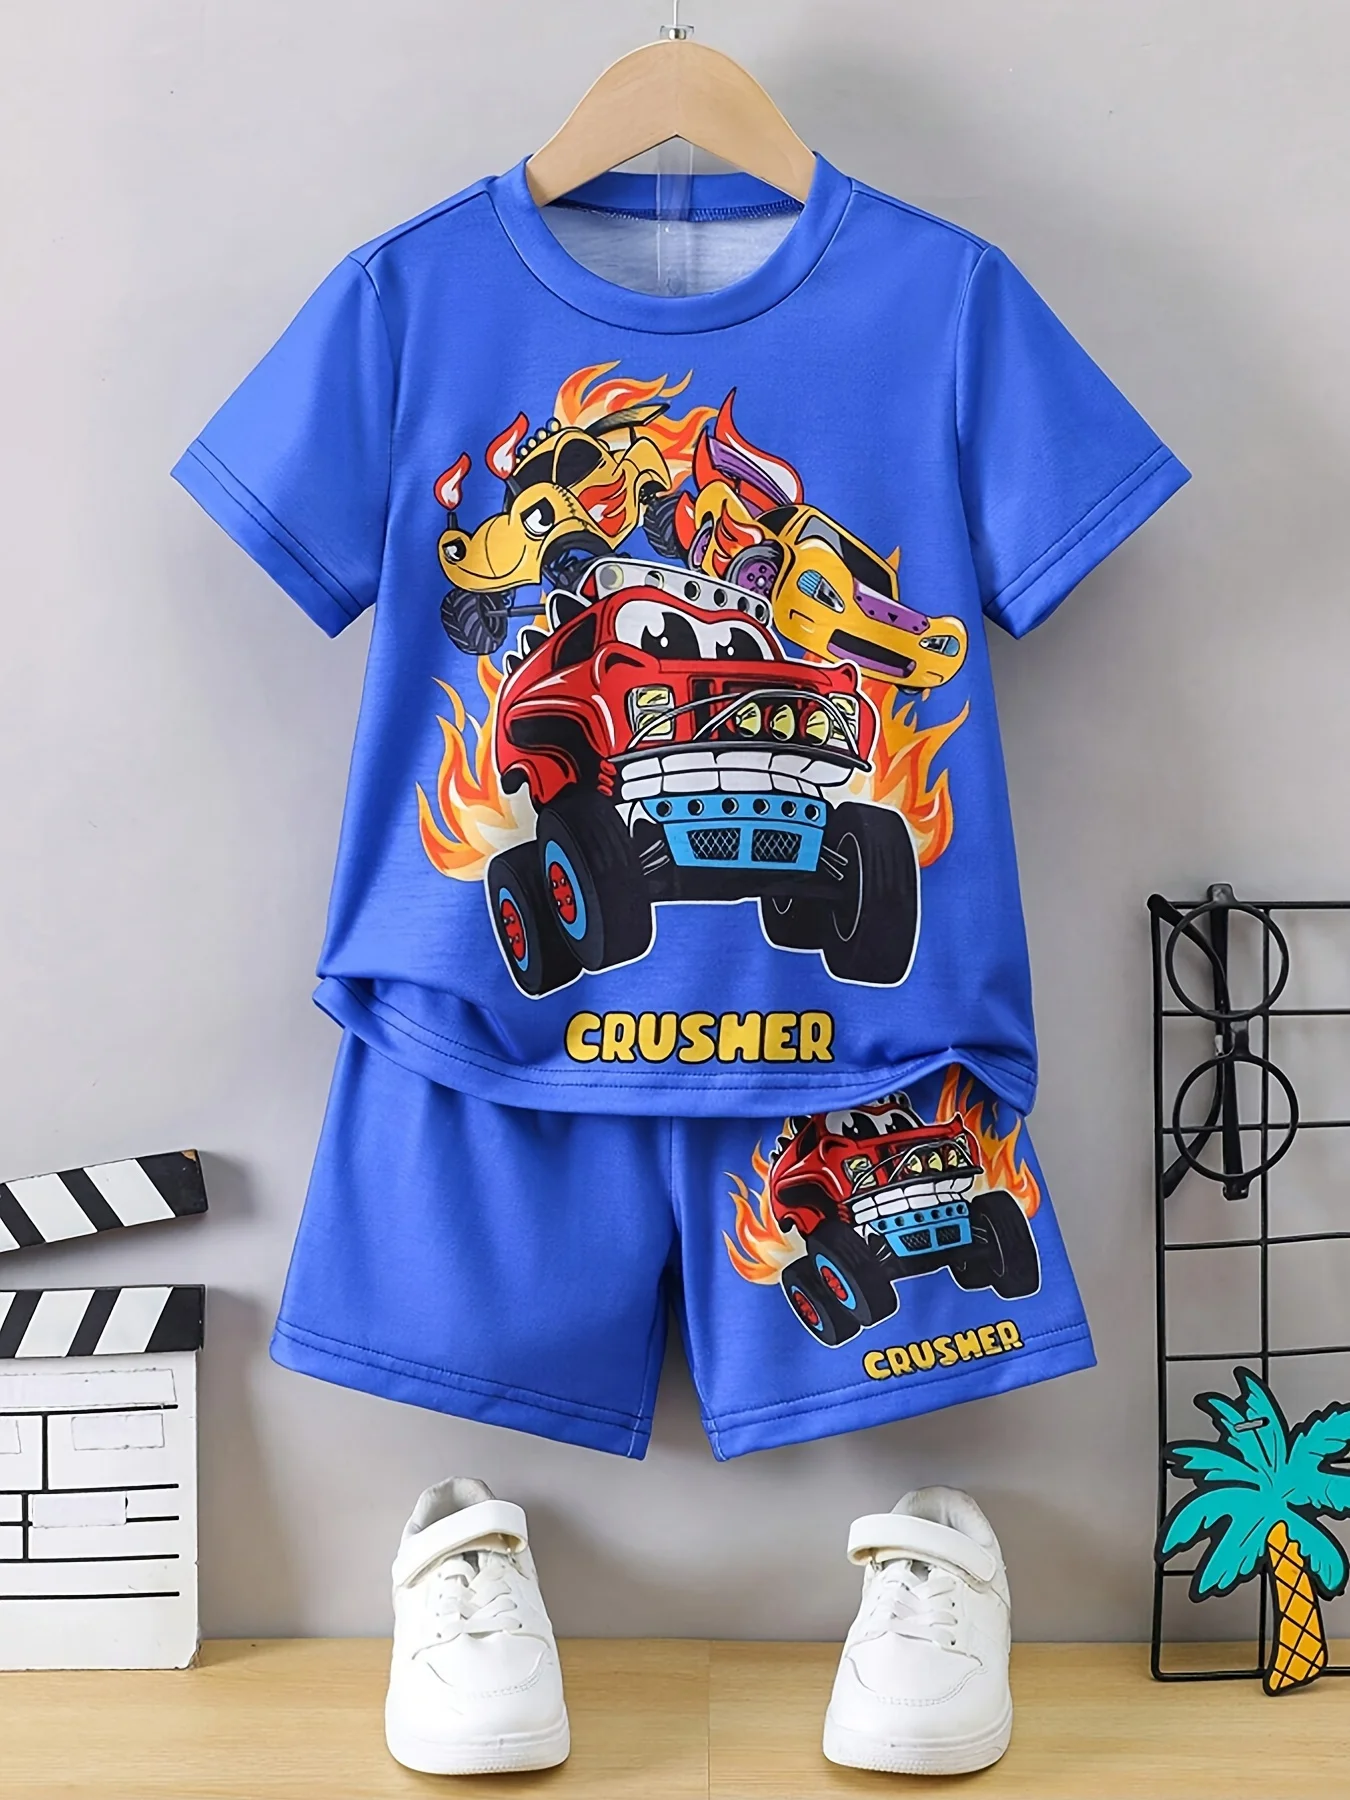 

Boys' 2-piece Racing Car Cool Fashion Casual Loungewear Pajama Set, Cozy Short Sleeve Shirt and Shorts Outfit for Kids